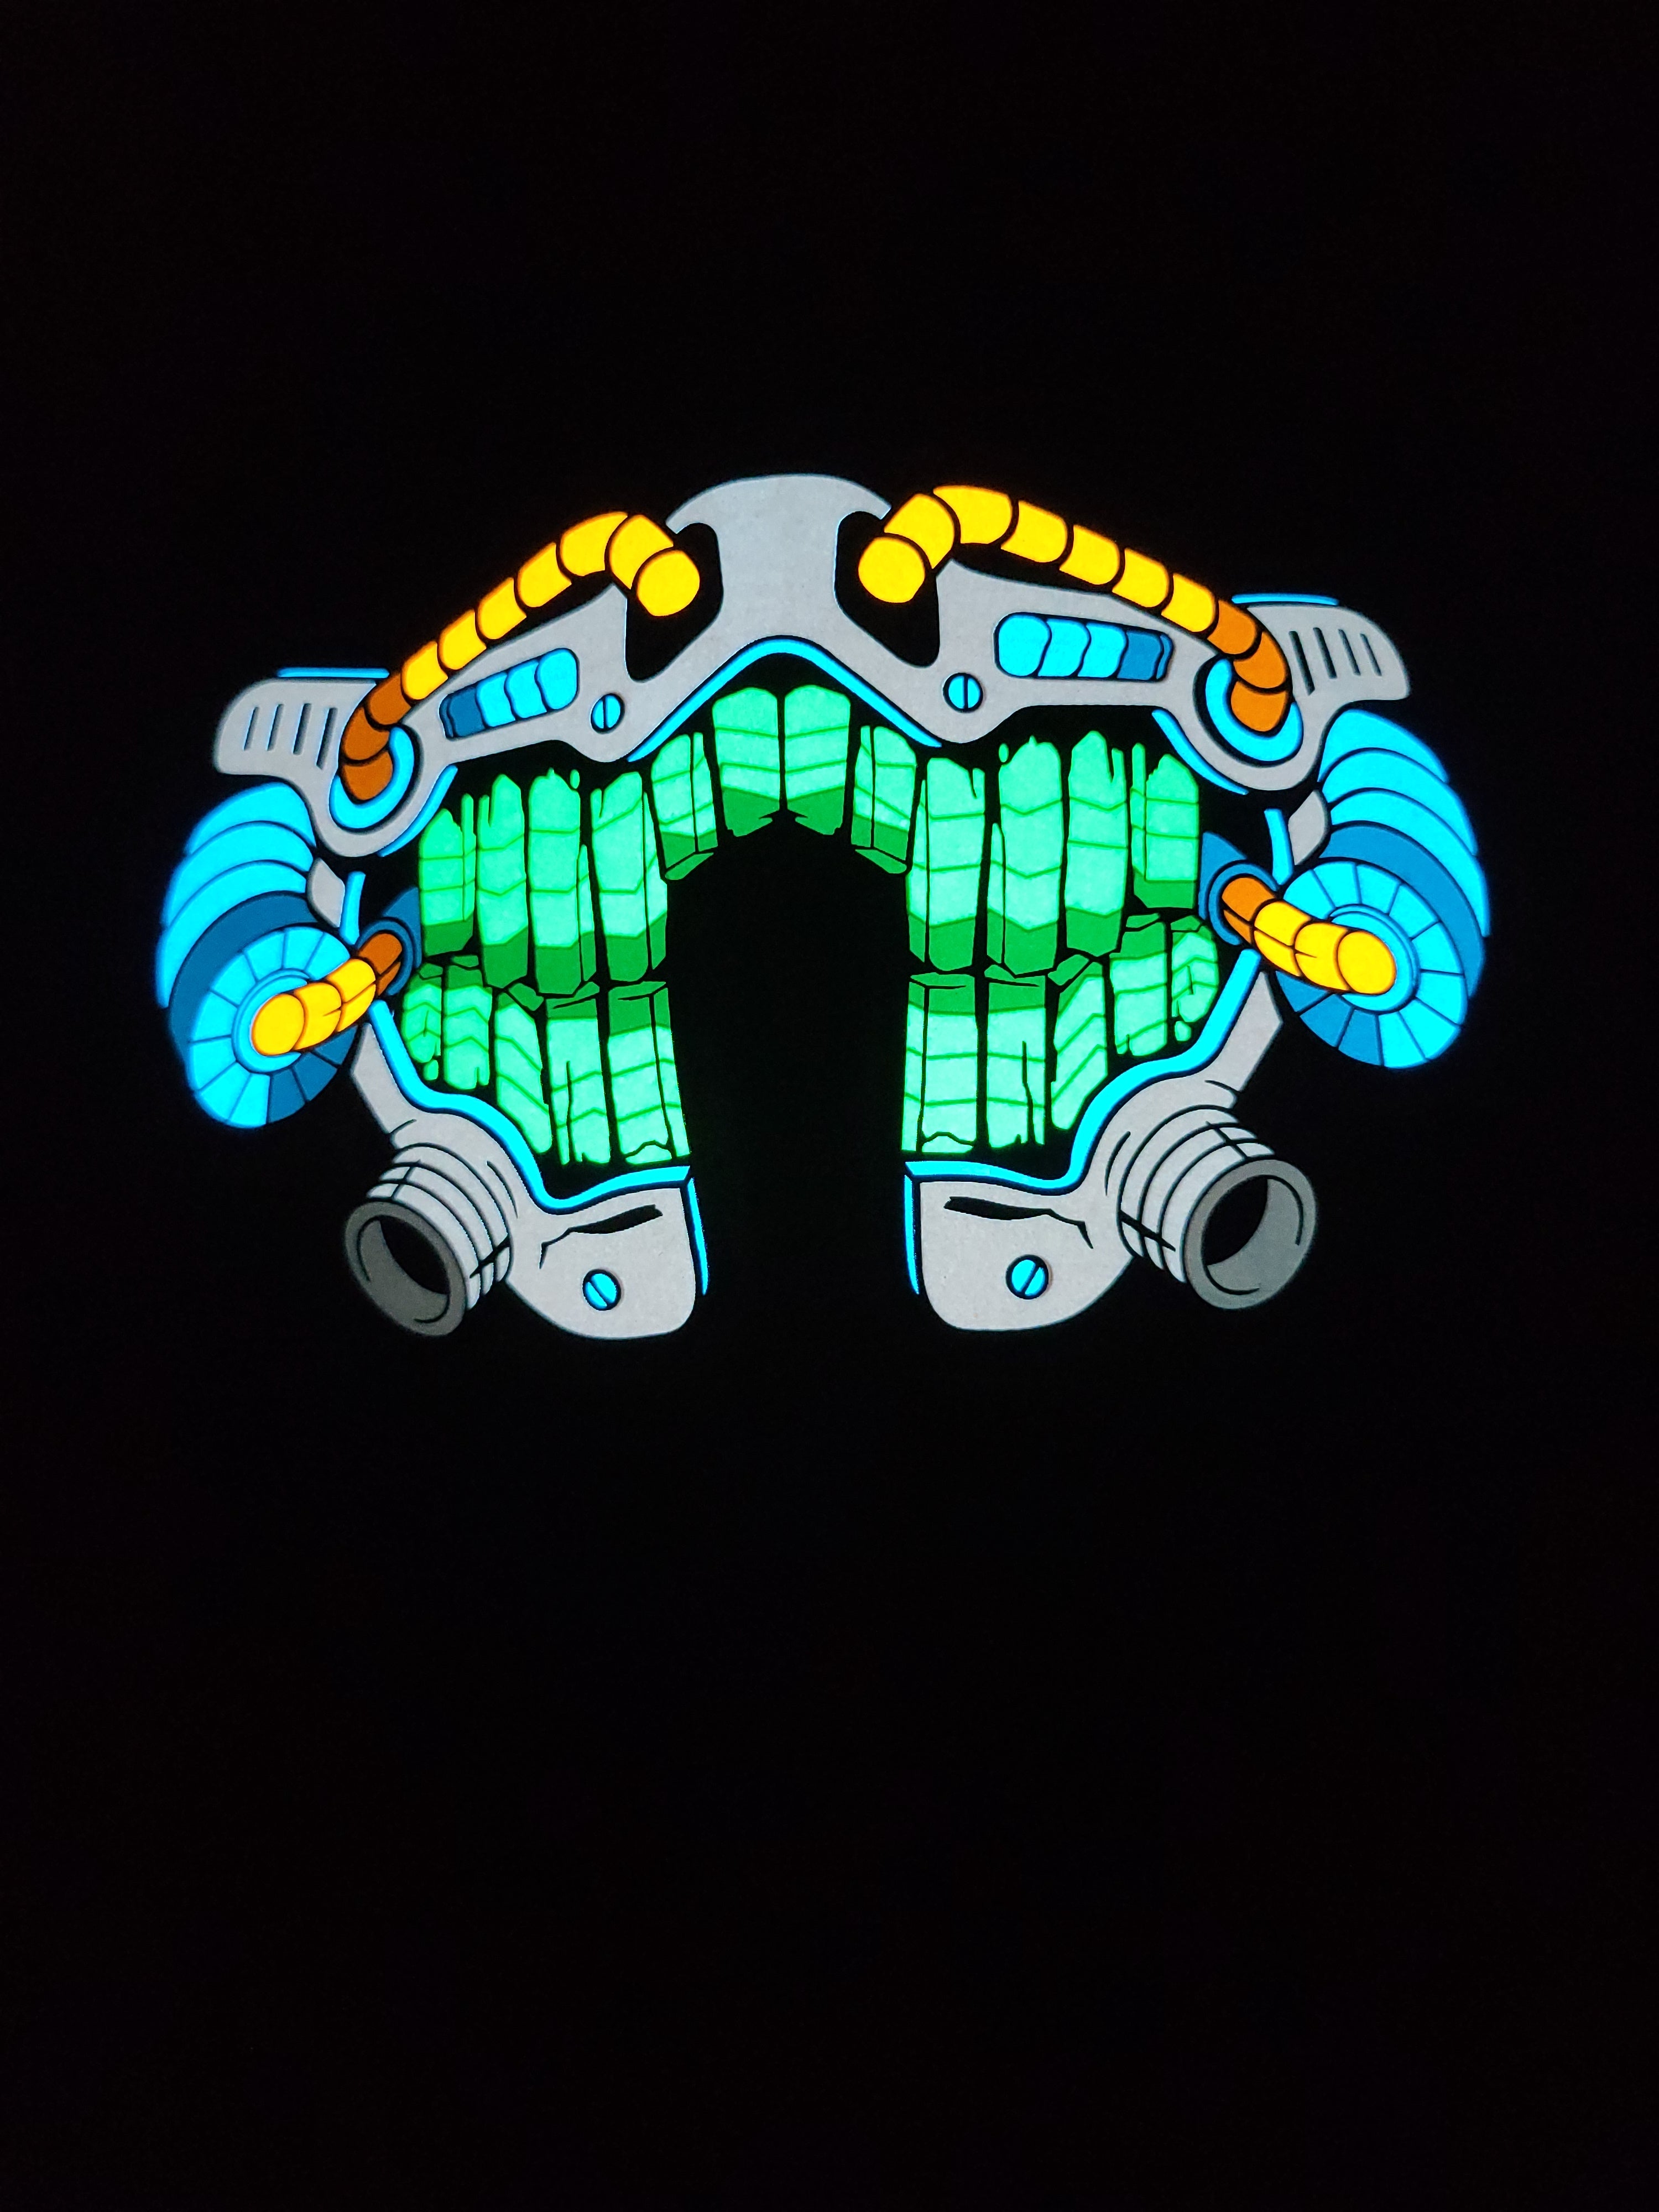 Sound activated infected mech mask